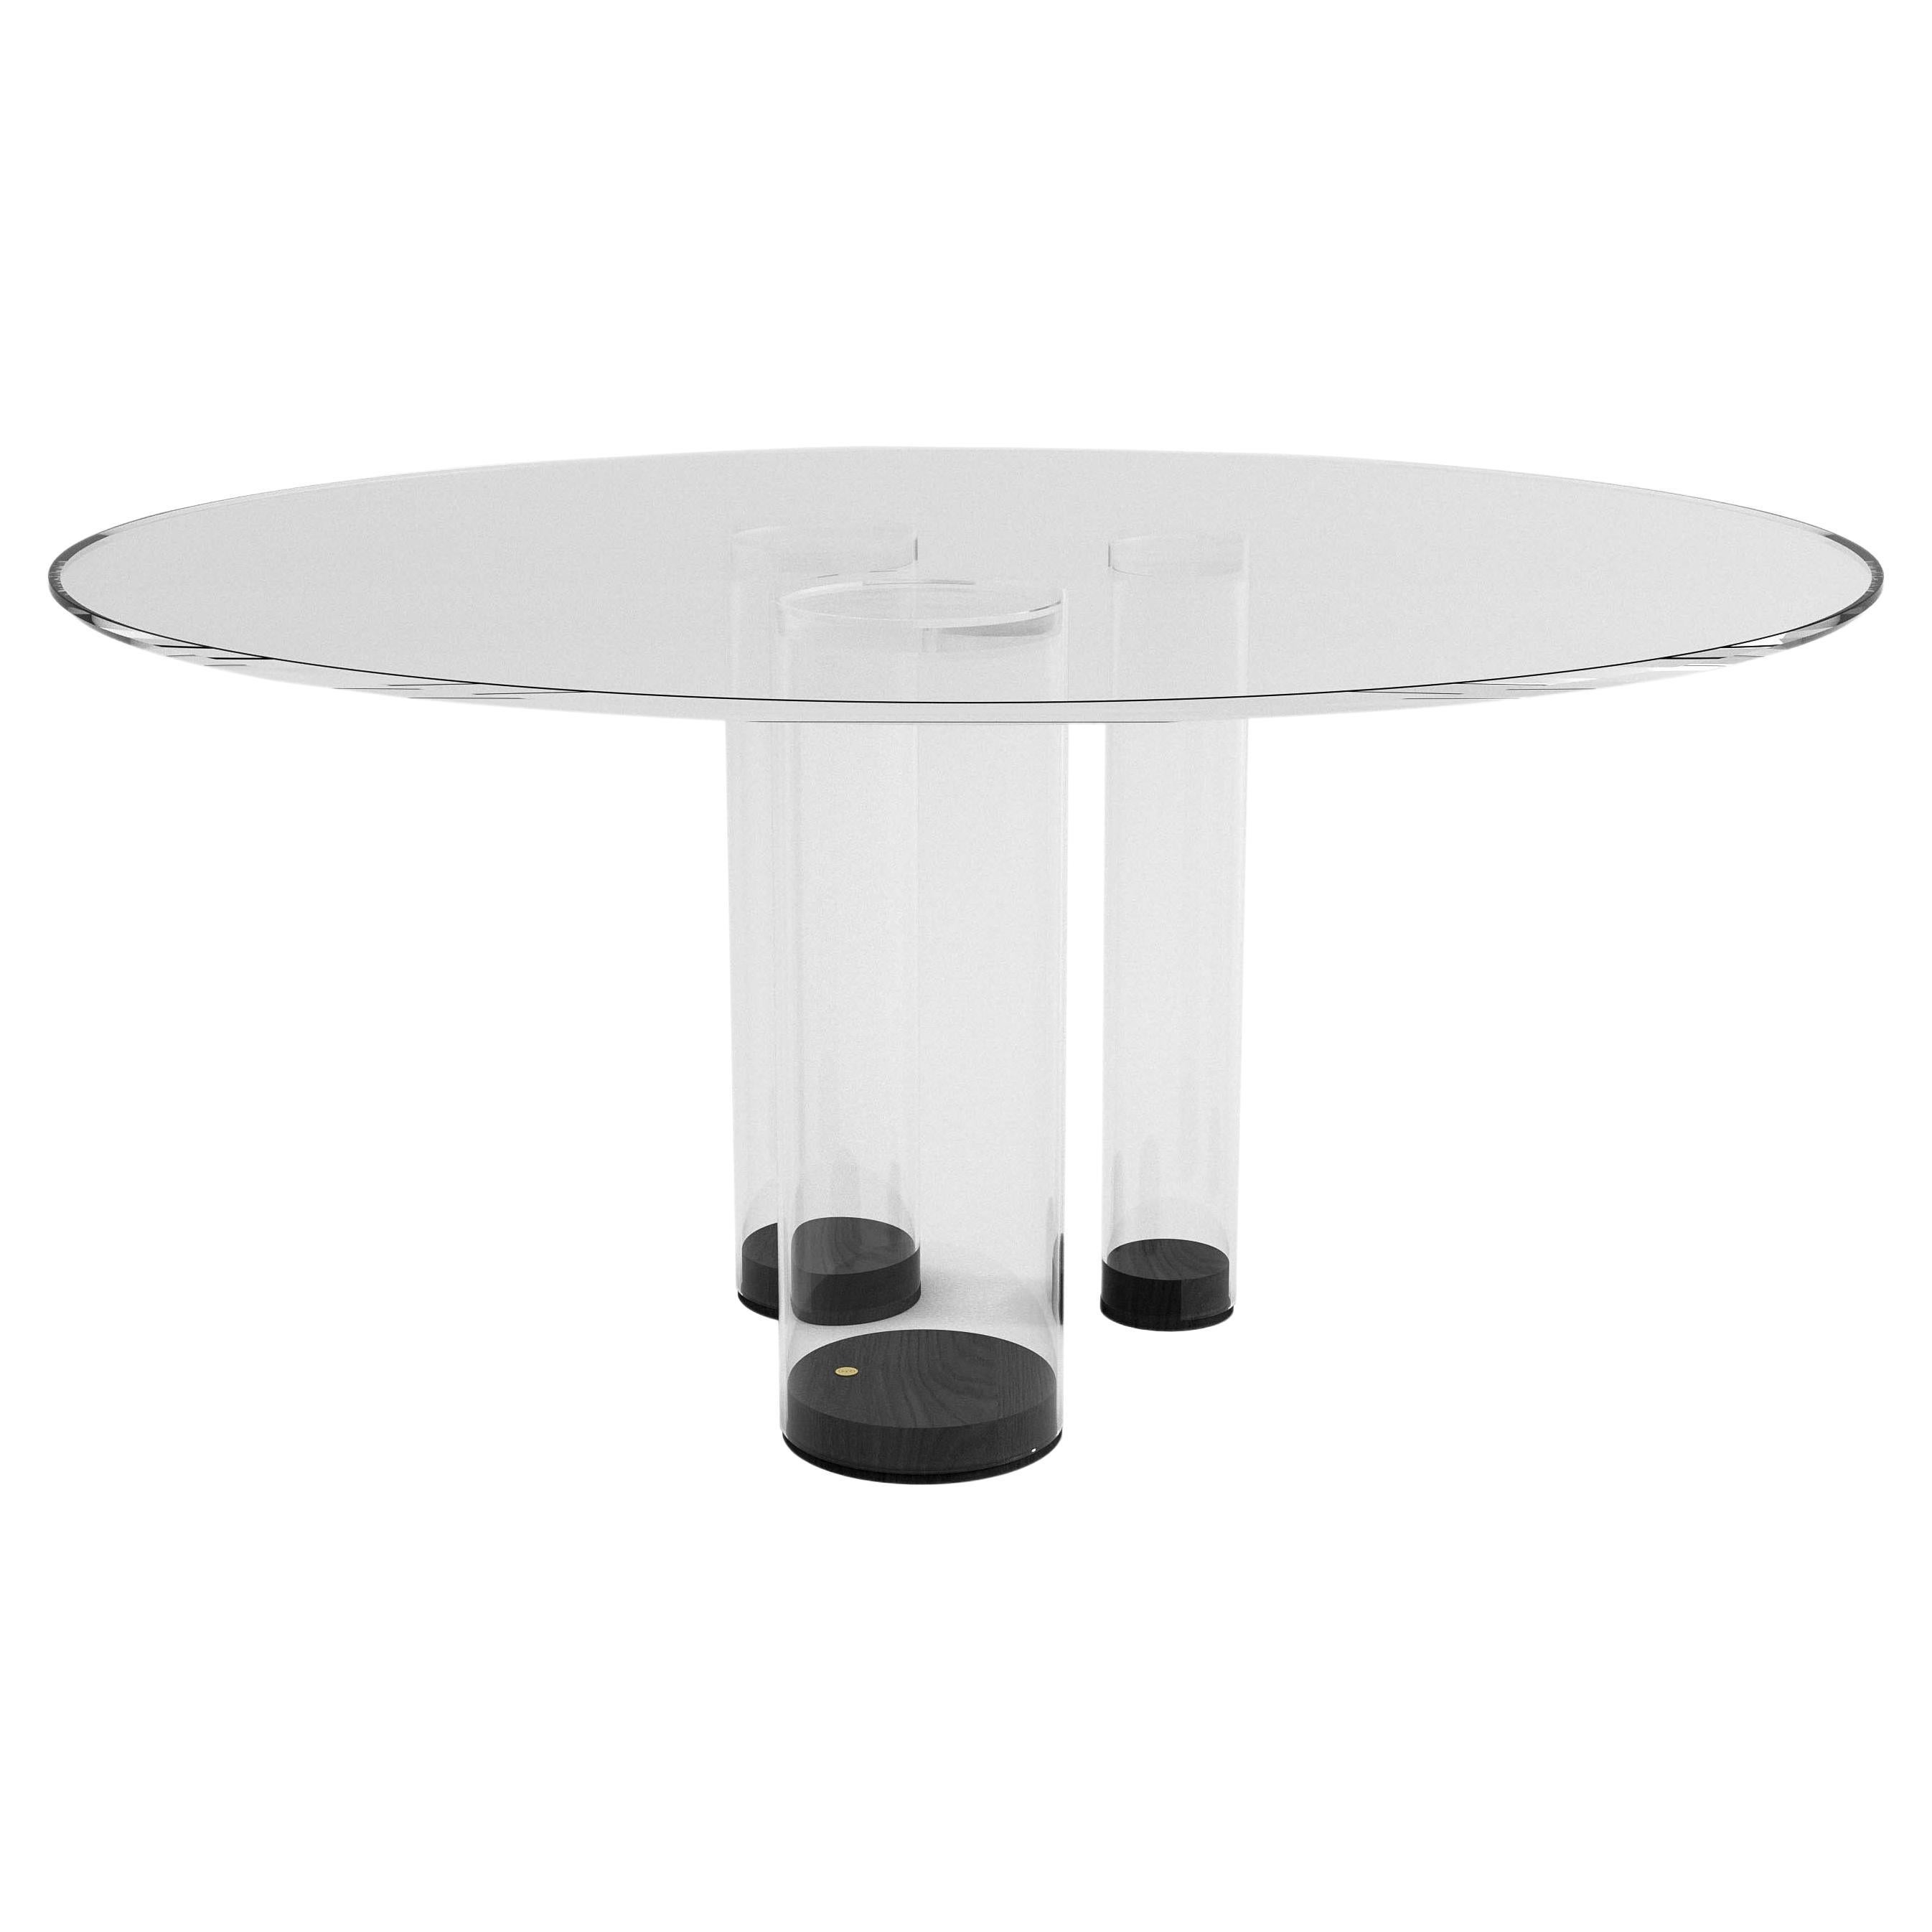 Contemporary round dining table, white glass & black oak wood, Belgian design For Sale